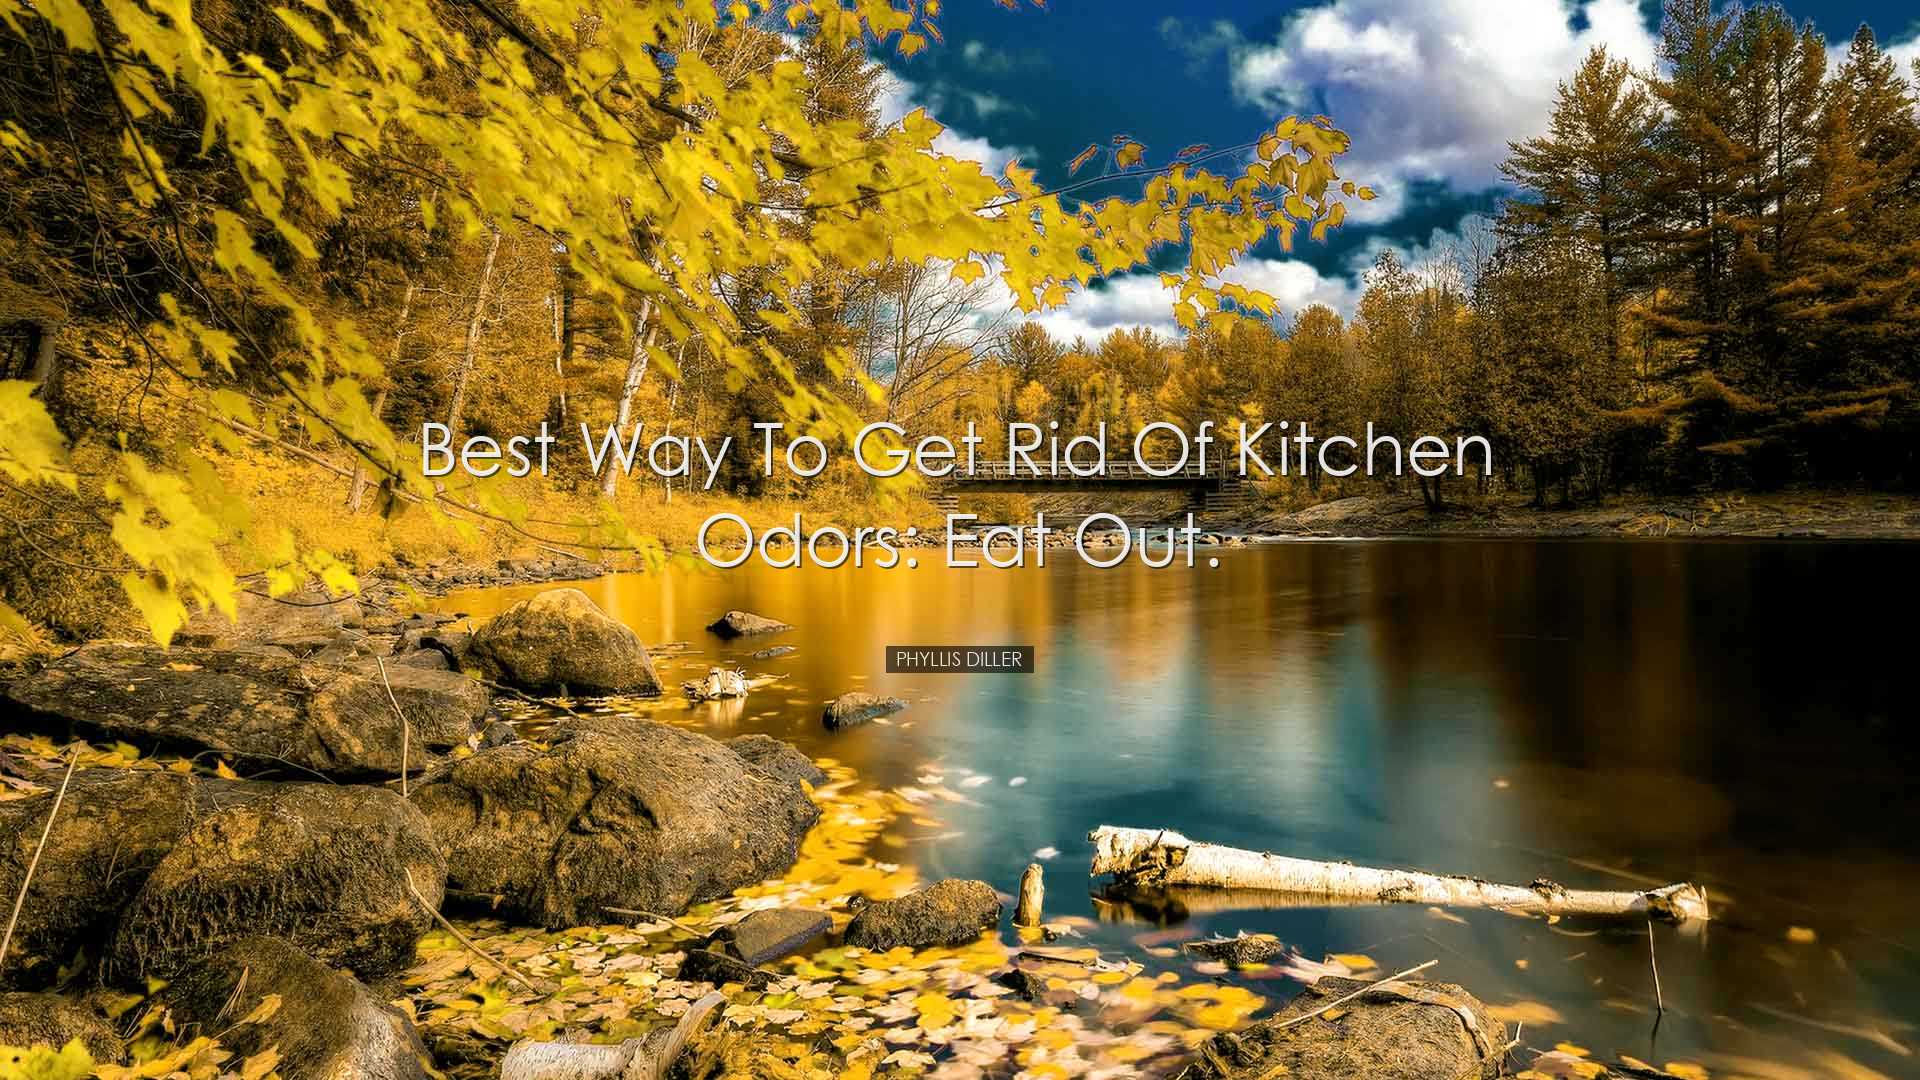 Best way to get rid of kitchen odors: Eat out. - Phyllis Diller